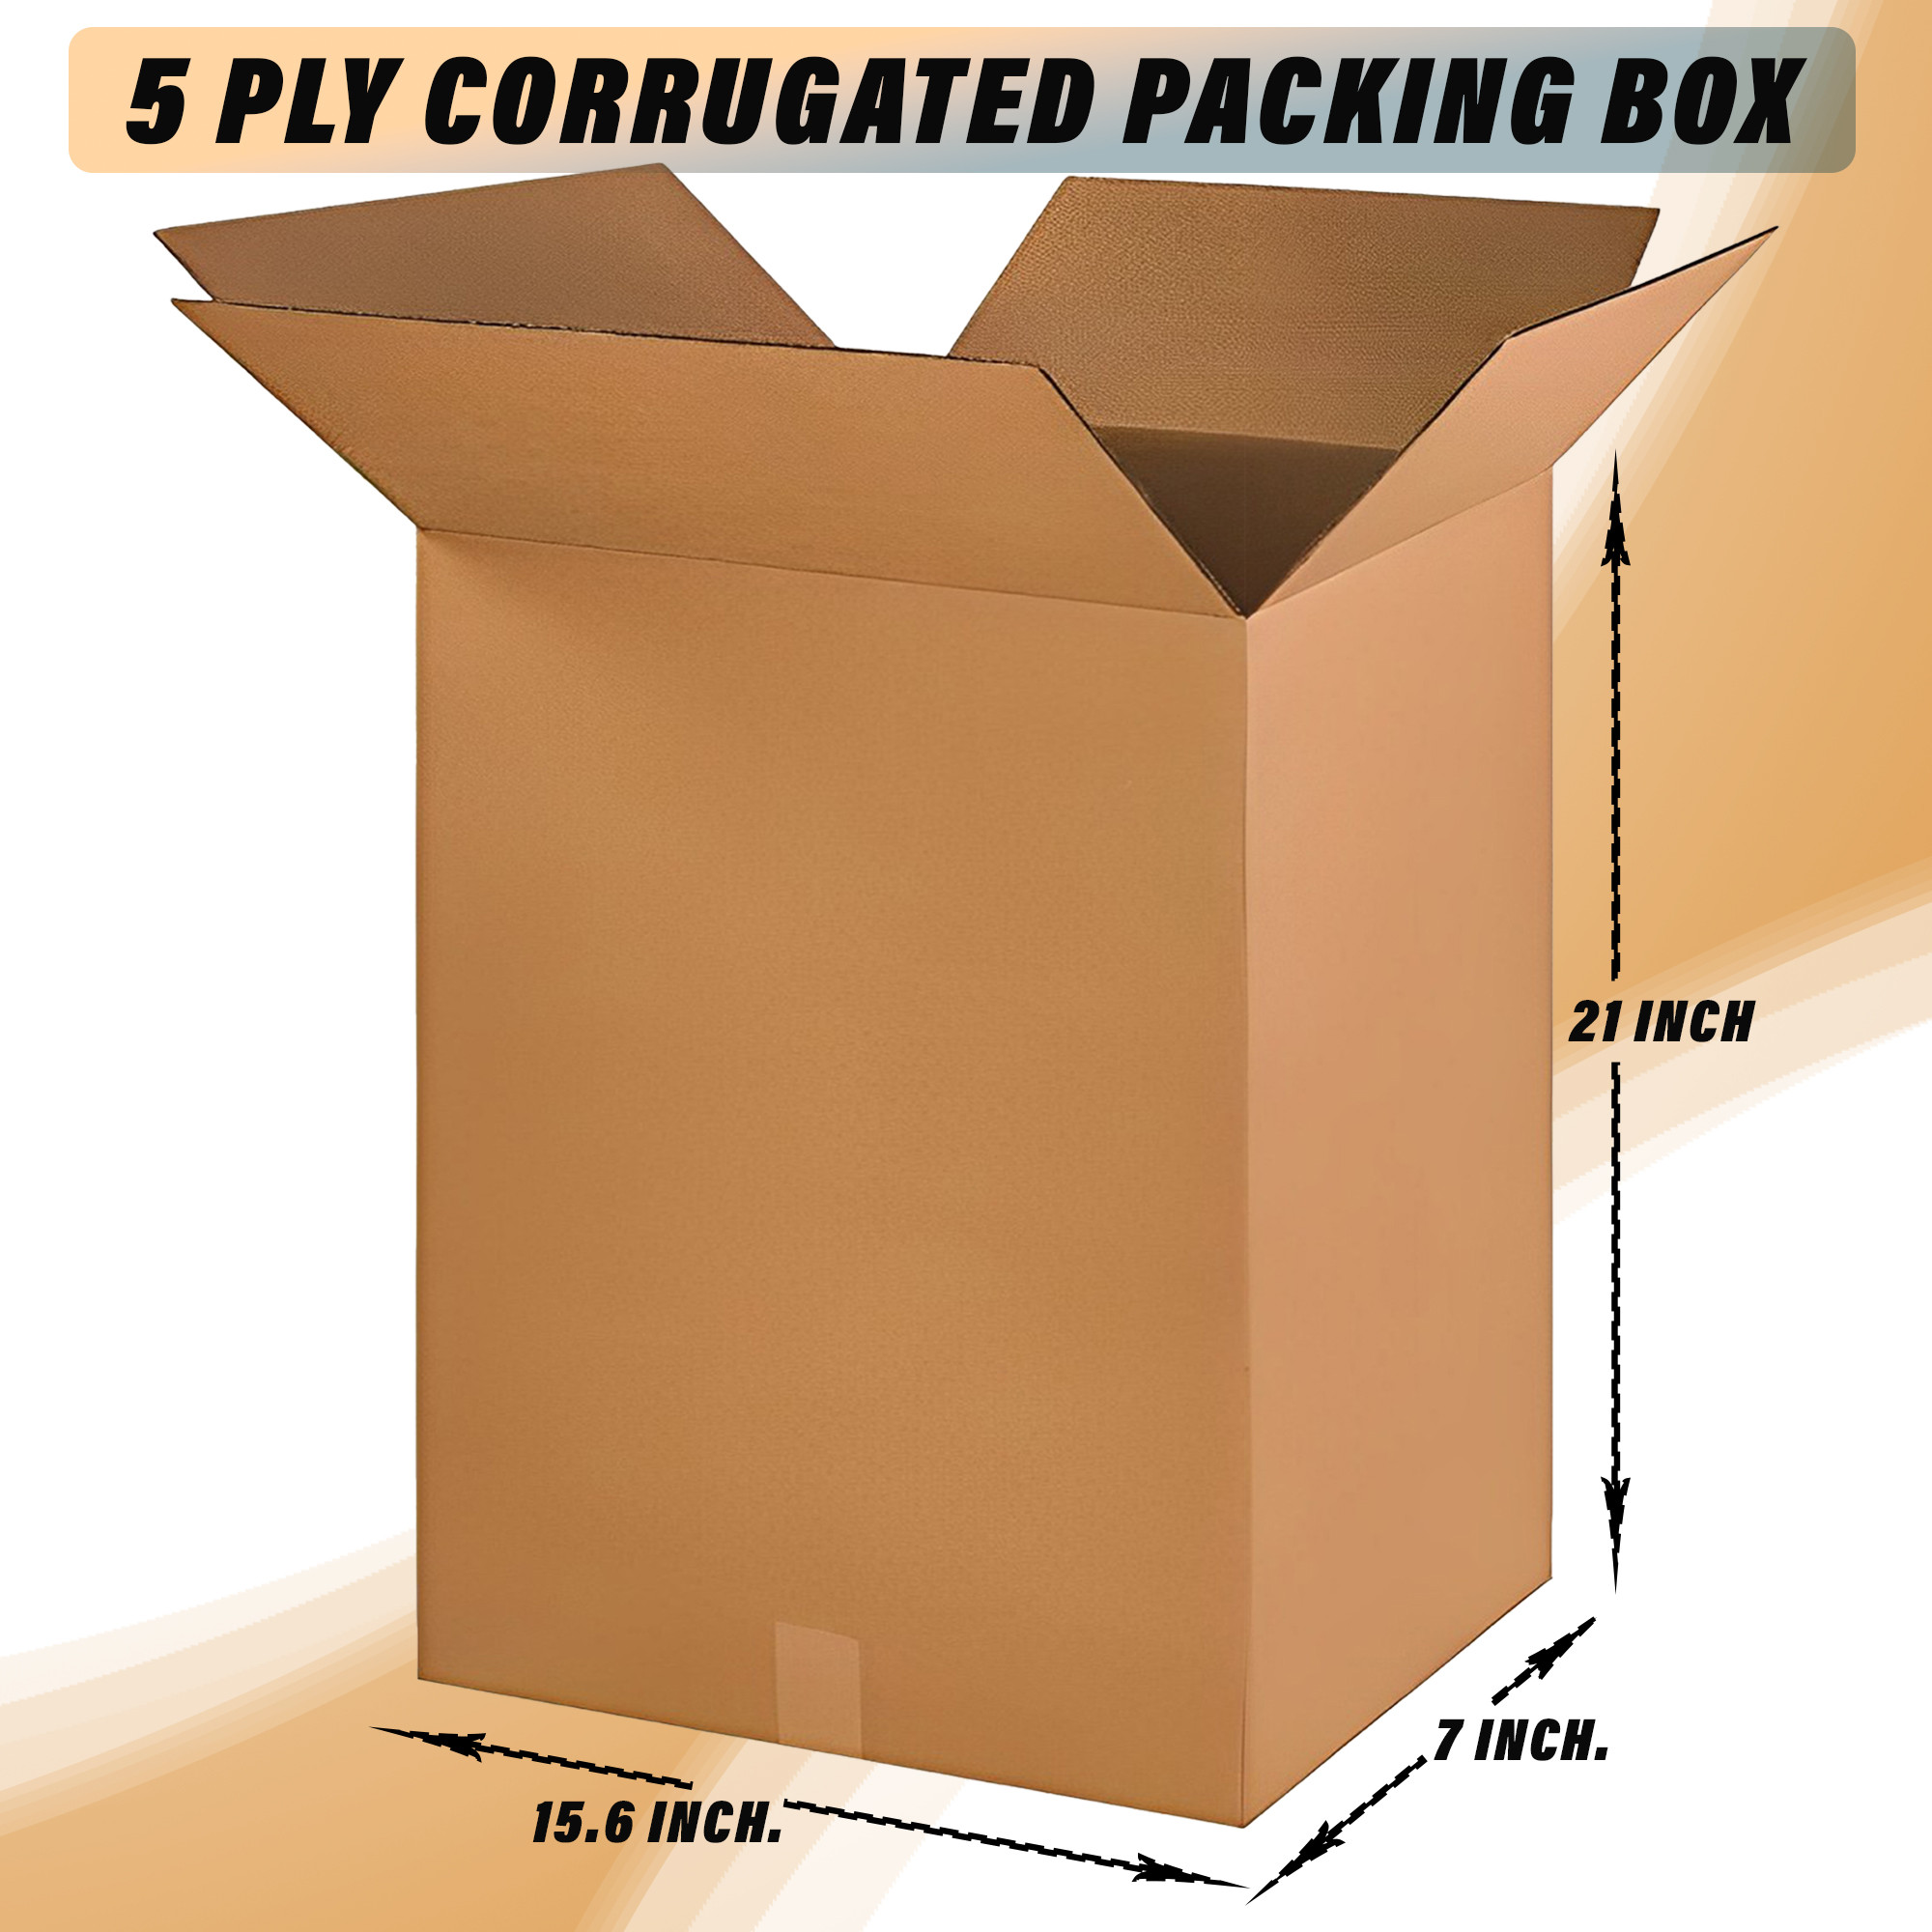 Kuber Industries Corrugated Box | 5 Ply Corrugated Packing Box | Corrugated for Shipping | Corrugated for Courier & Goods Transportation | L 15.6 x W 7 x H 21 Inch |Brown